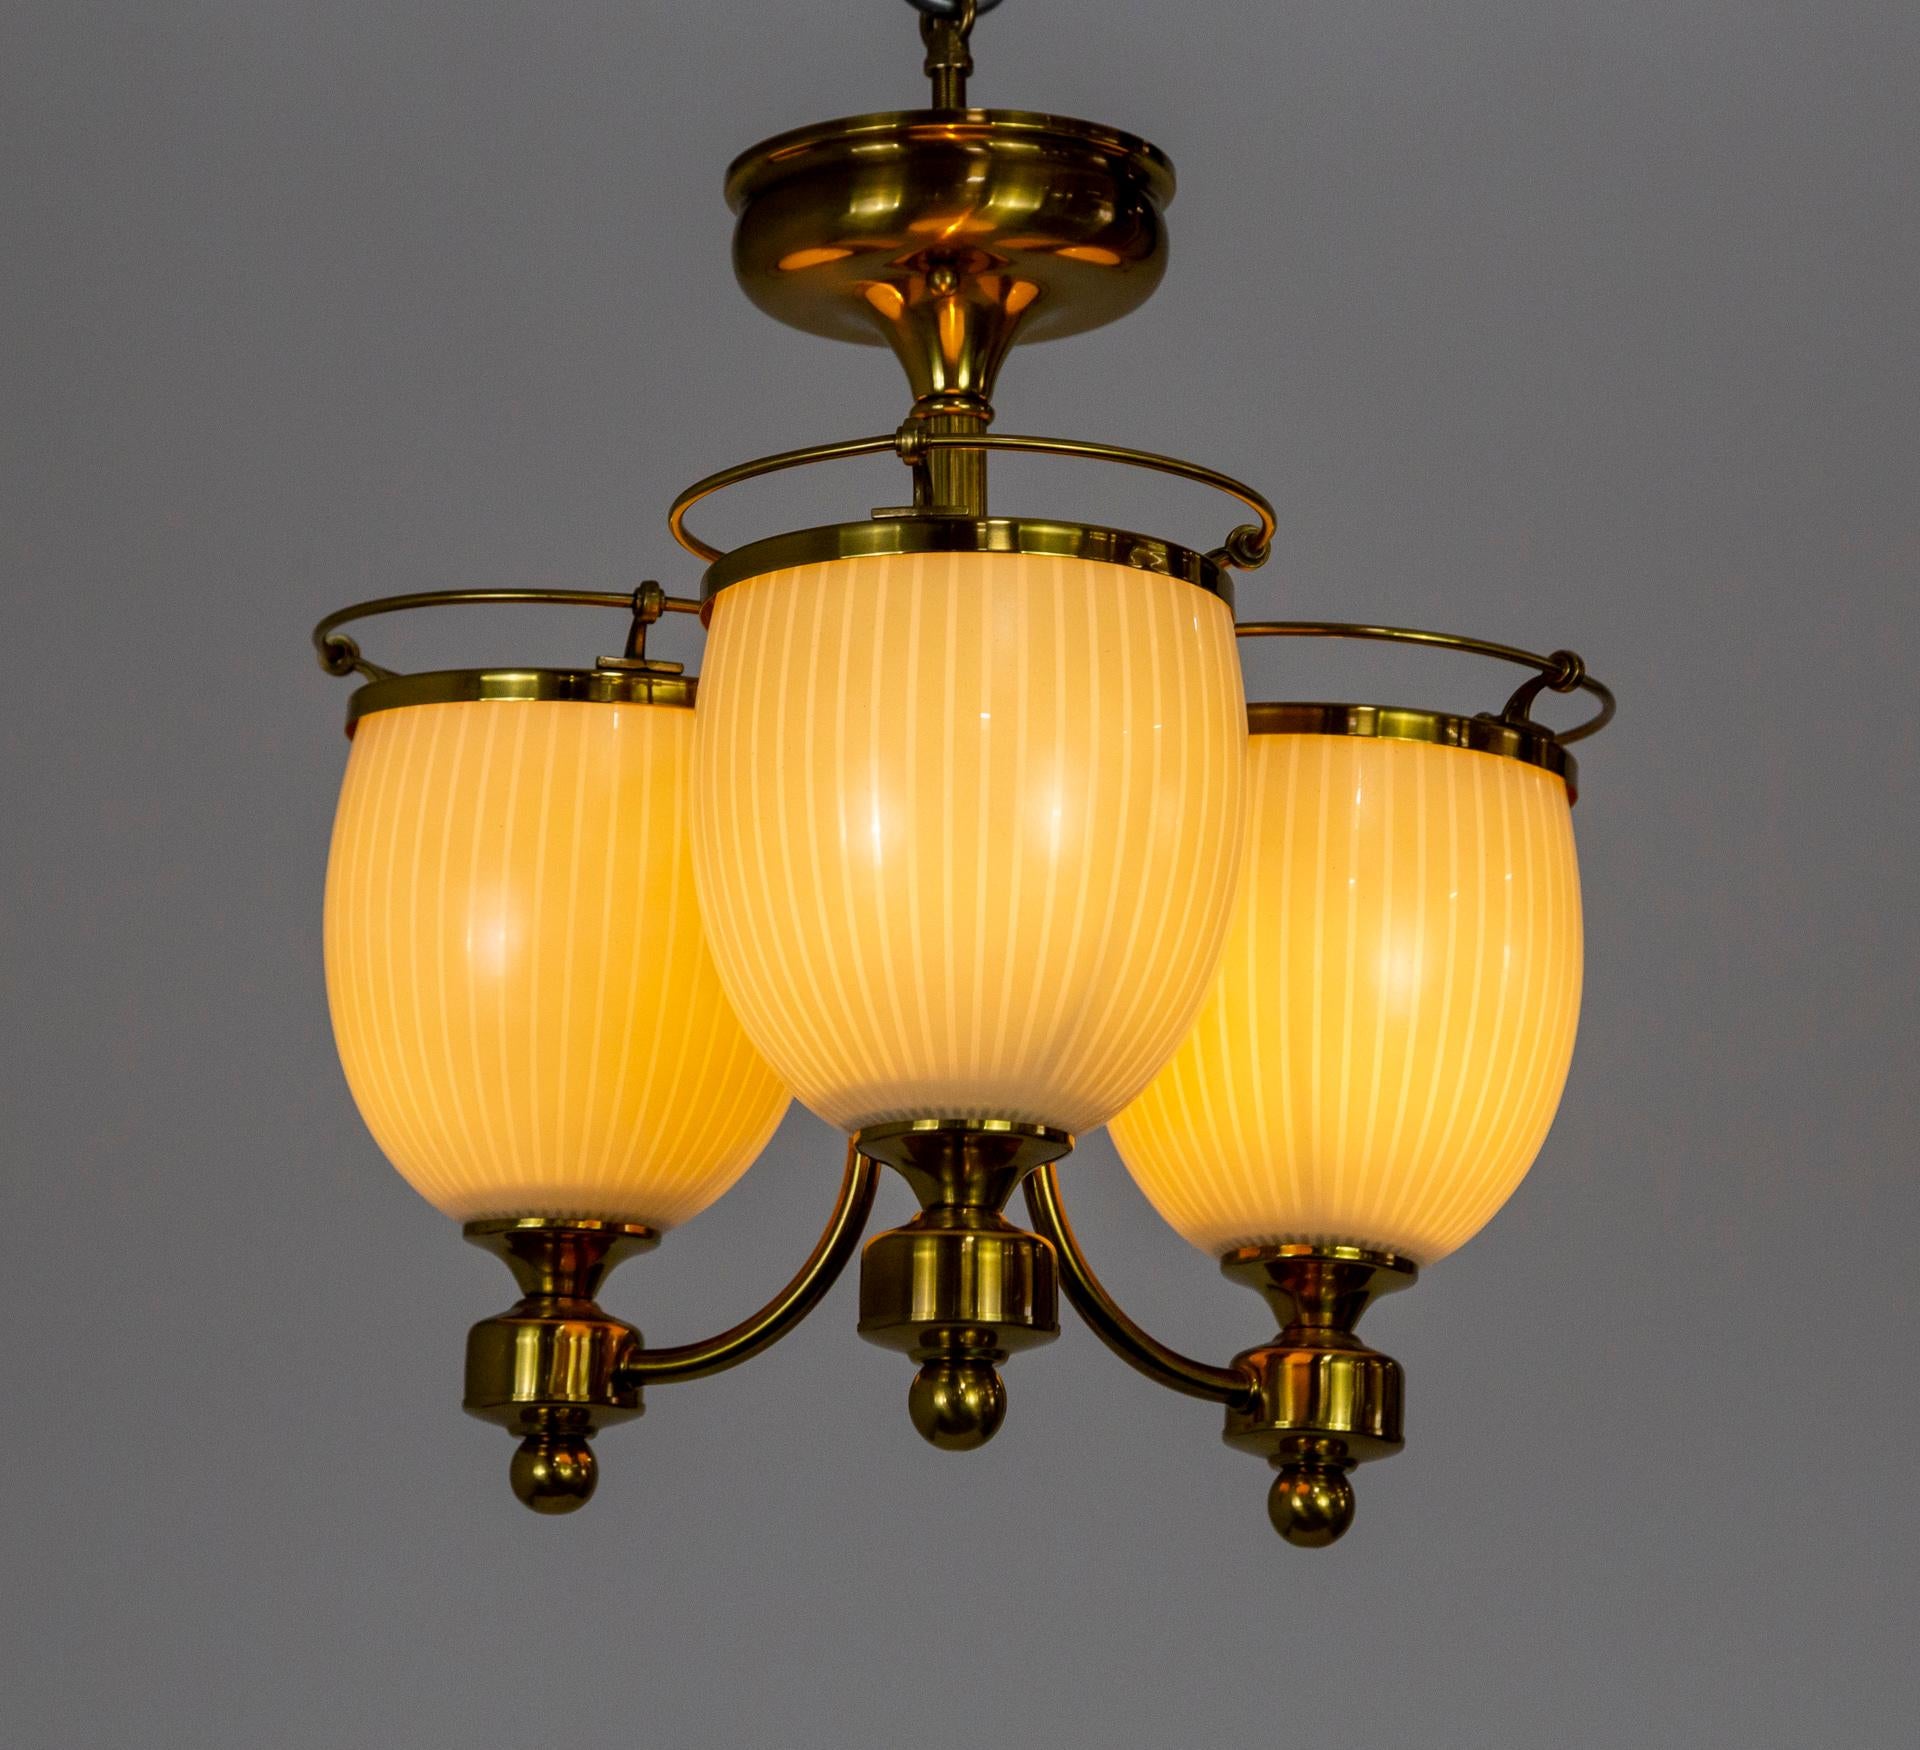 A brass chandelier in a compact design with three up-lights.  The cream glass shades have subtle stripes and are rimmed with open brass wire caps. A versatile design to fit multiple decors. Contemporary.  Newly made with new and vintage parts. 14.5